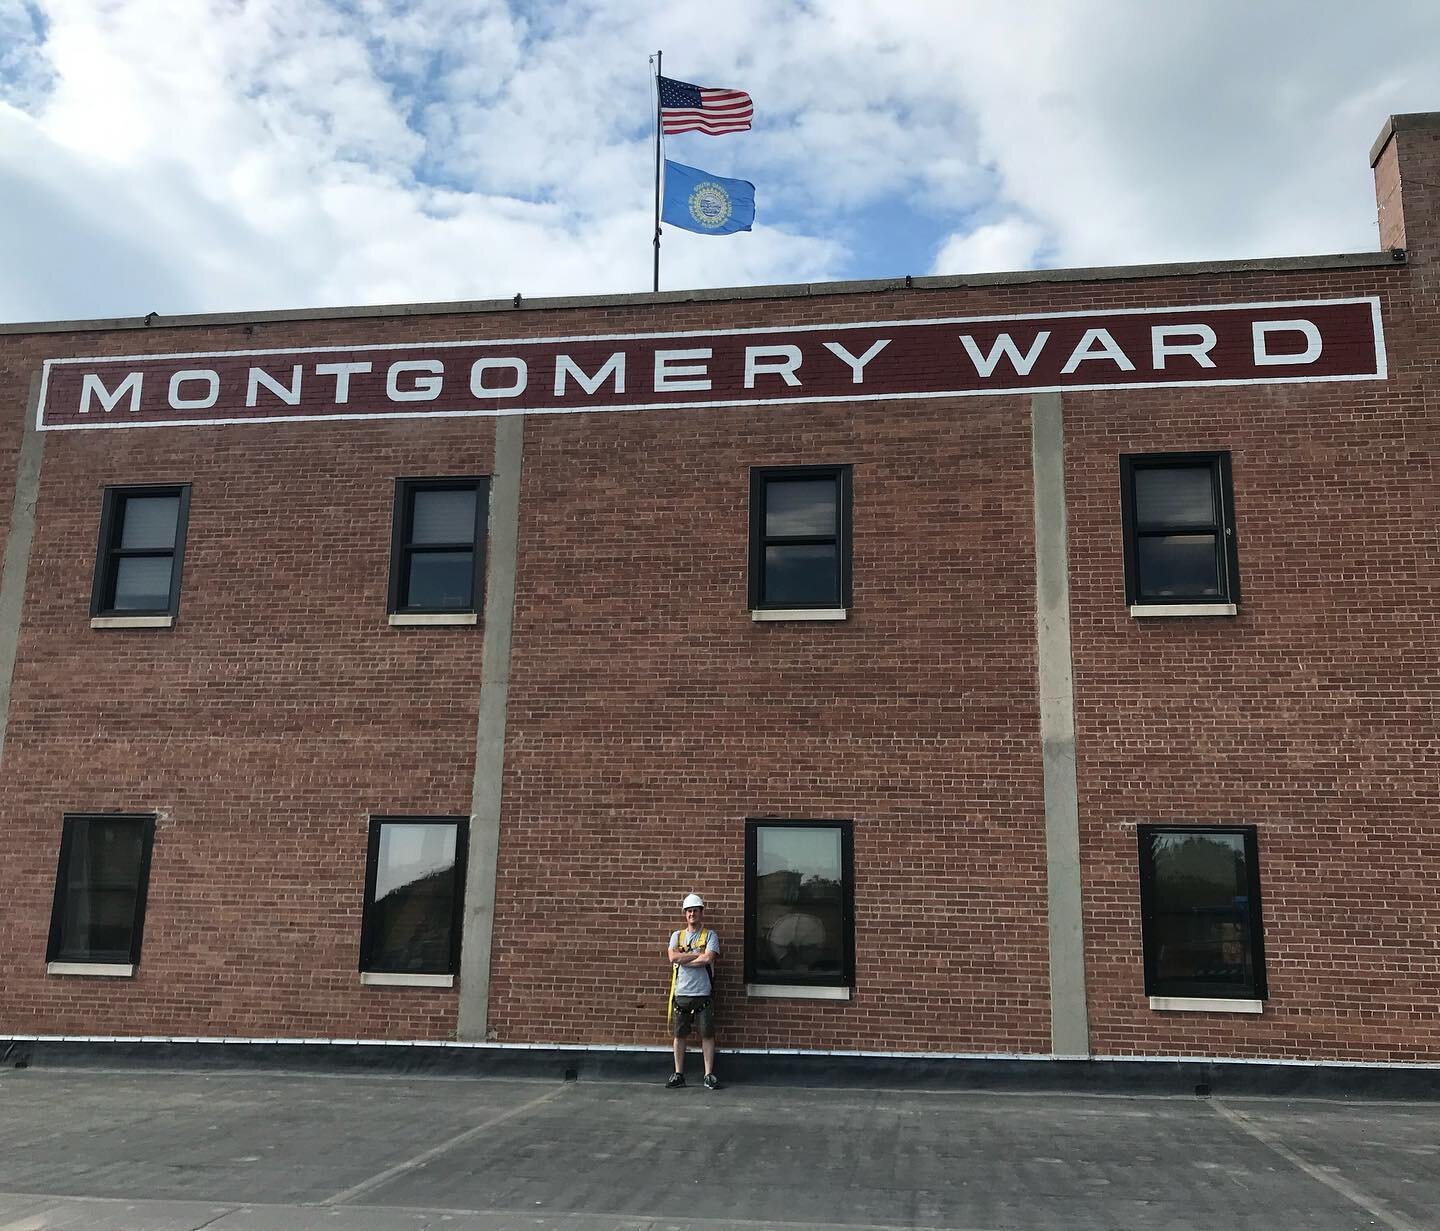 Here&rsquo;s one of the coolest projects we got to work on this year! We went down to Aberdeen, South Dakota to restore this classic Montgomery Ward wall sign in August. It was almost completely gone, and had likely been painted over at some point, b